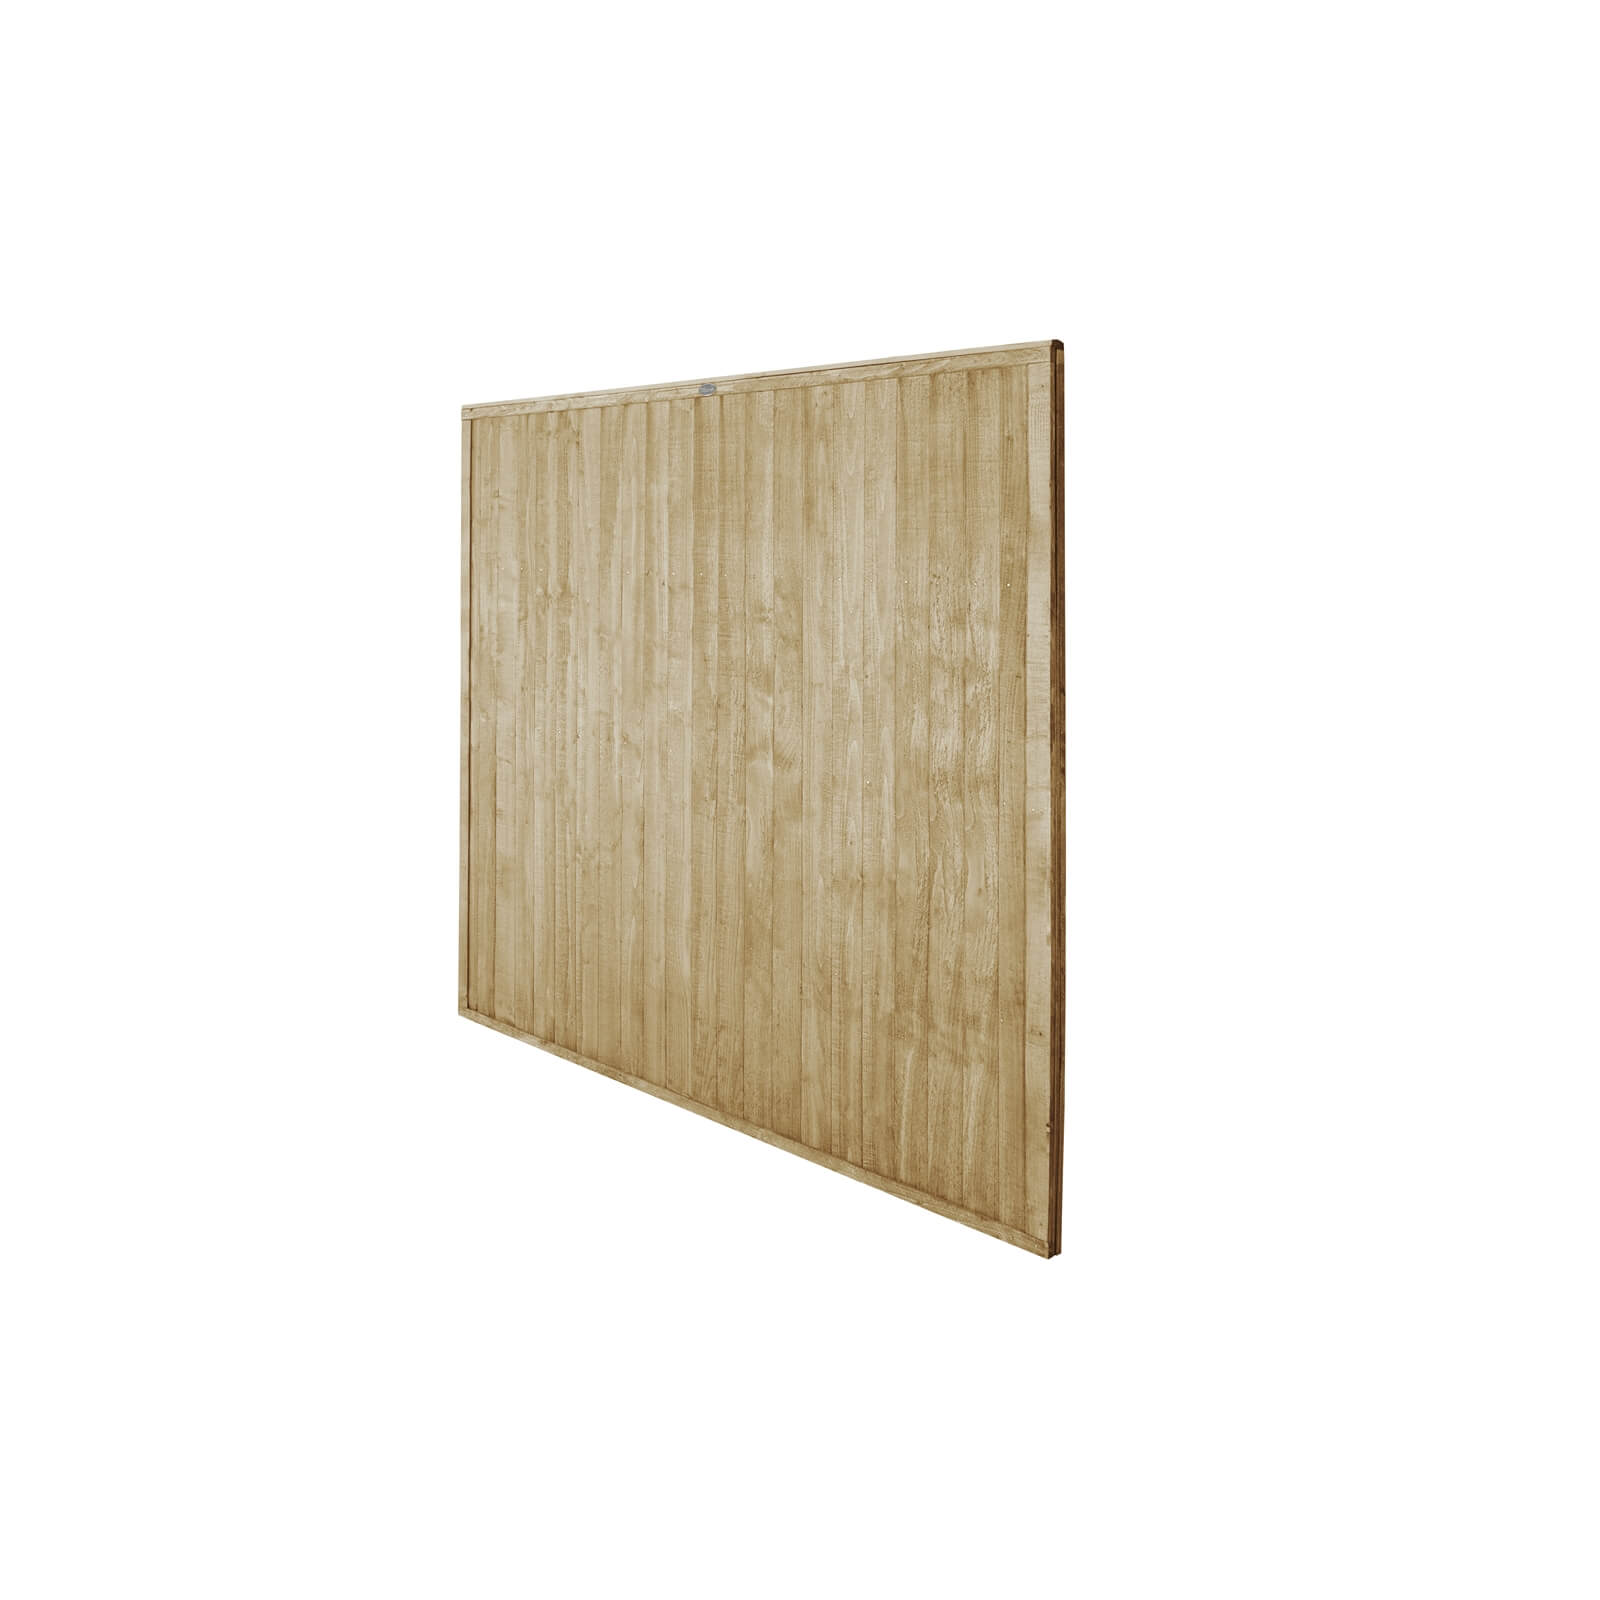 6ft x 6ft (1.83m x 1.83m) Pressure Treated Closeboard Fence Panel - Pack of 3